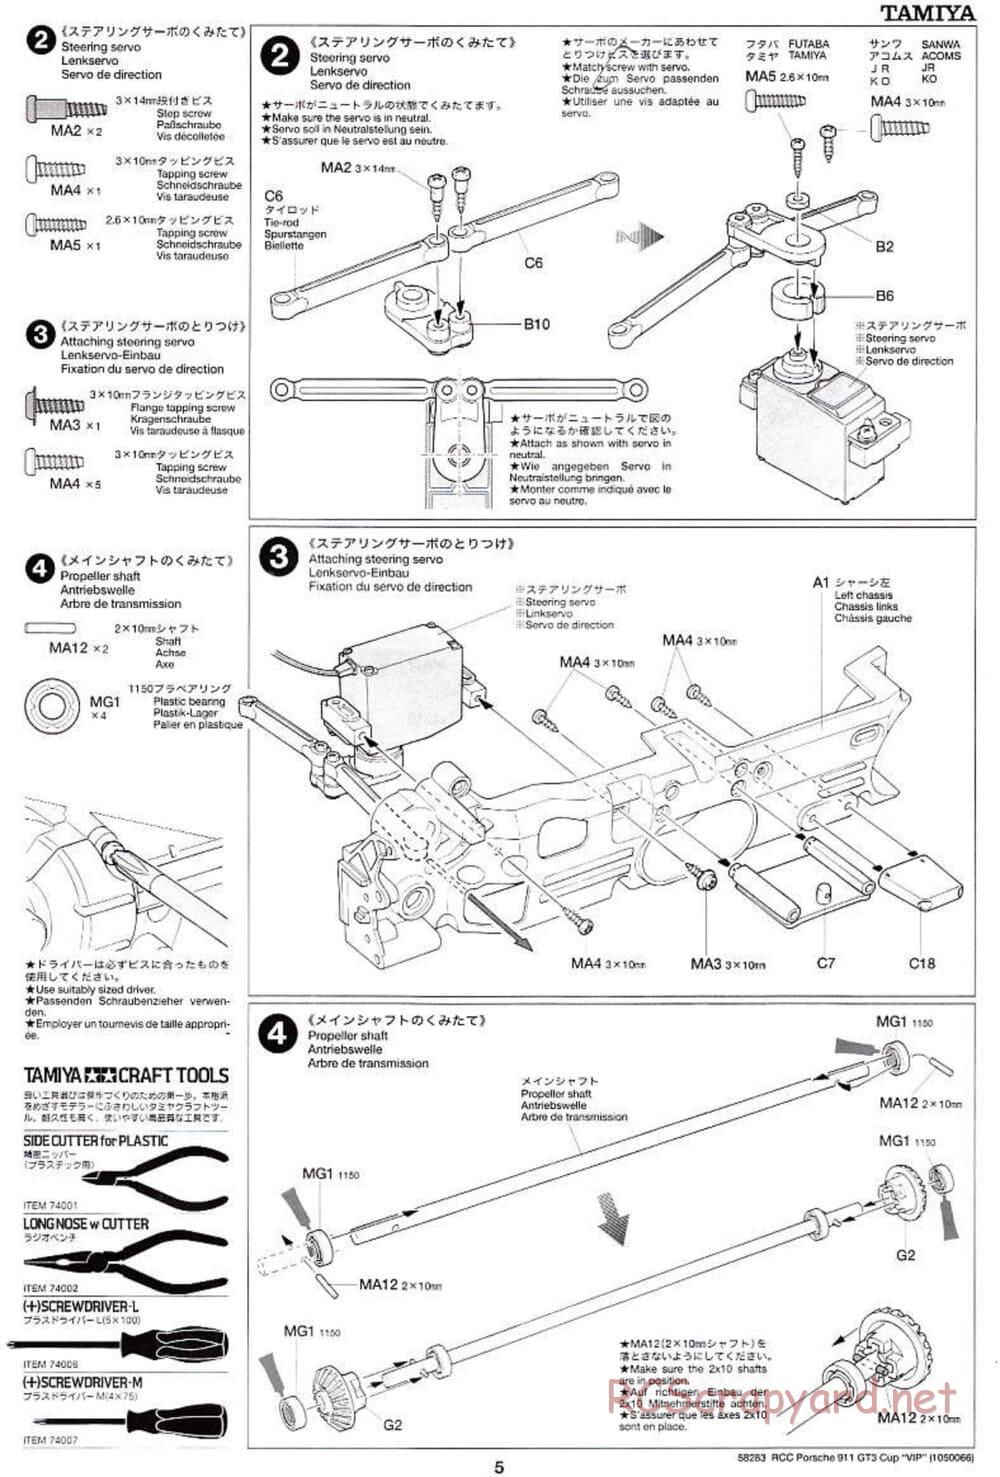 Tamiya - Porsche 911 GT3 Cup VIP - TL-01 Chassis - Manual - Page 5